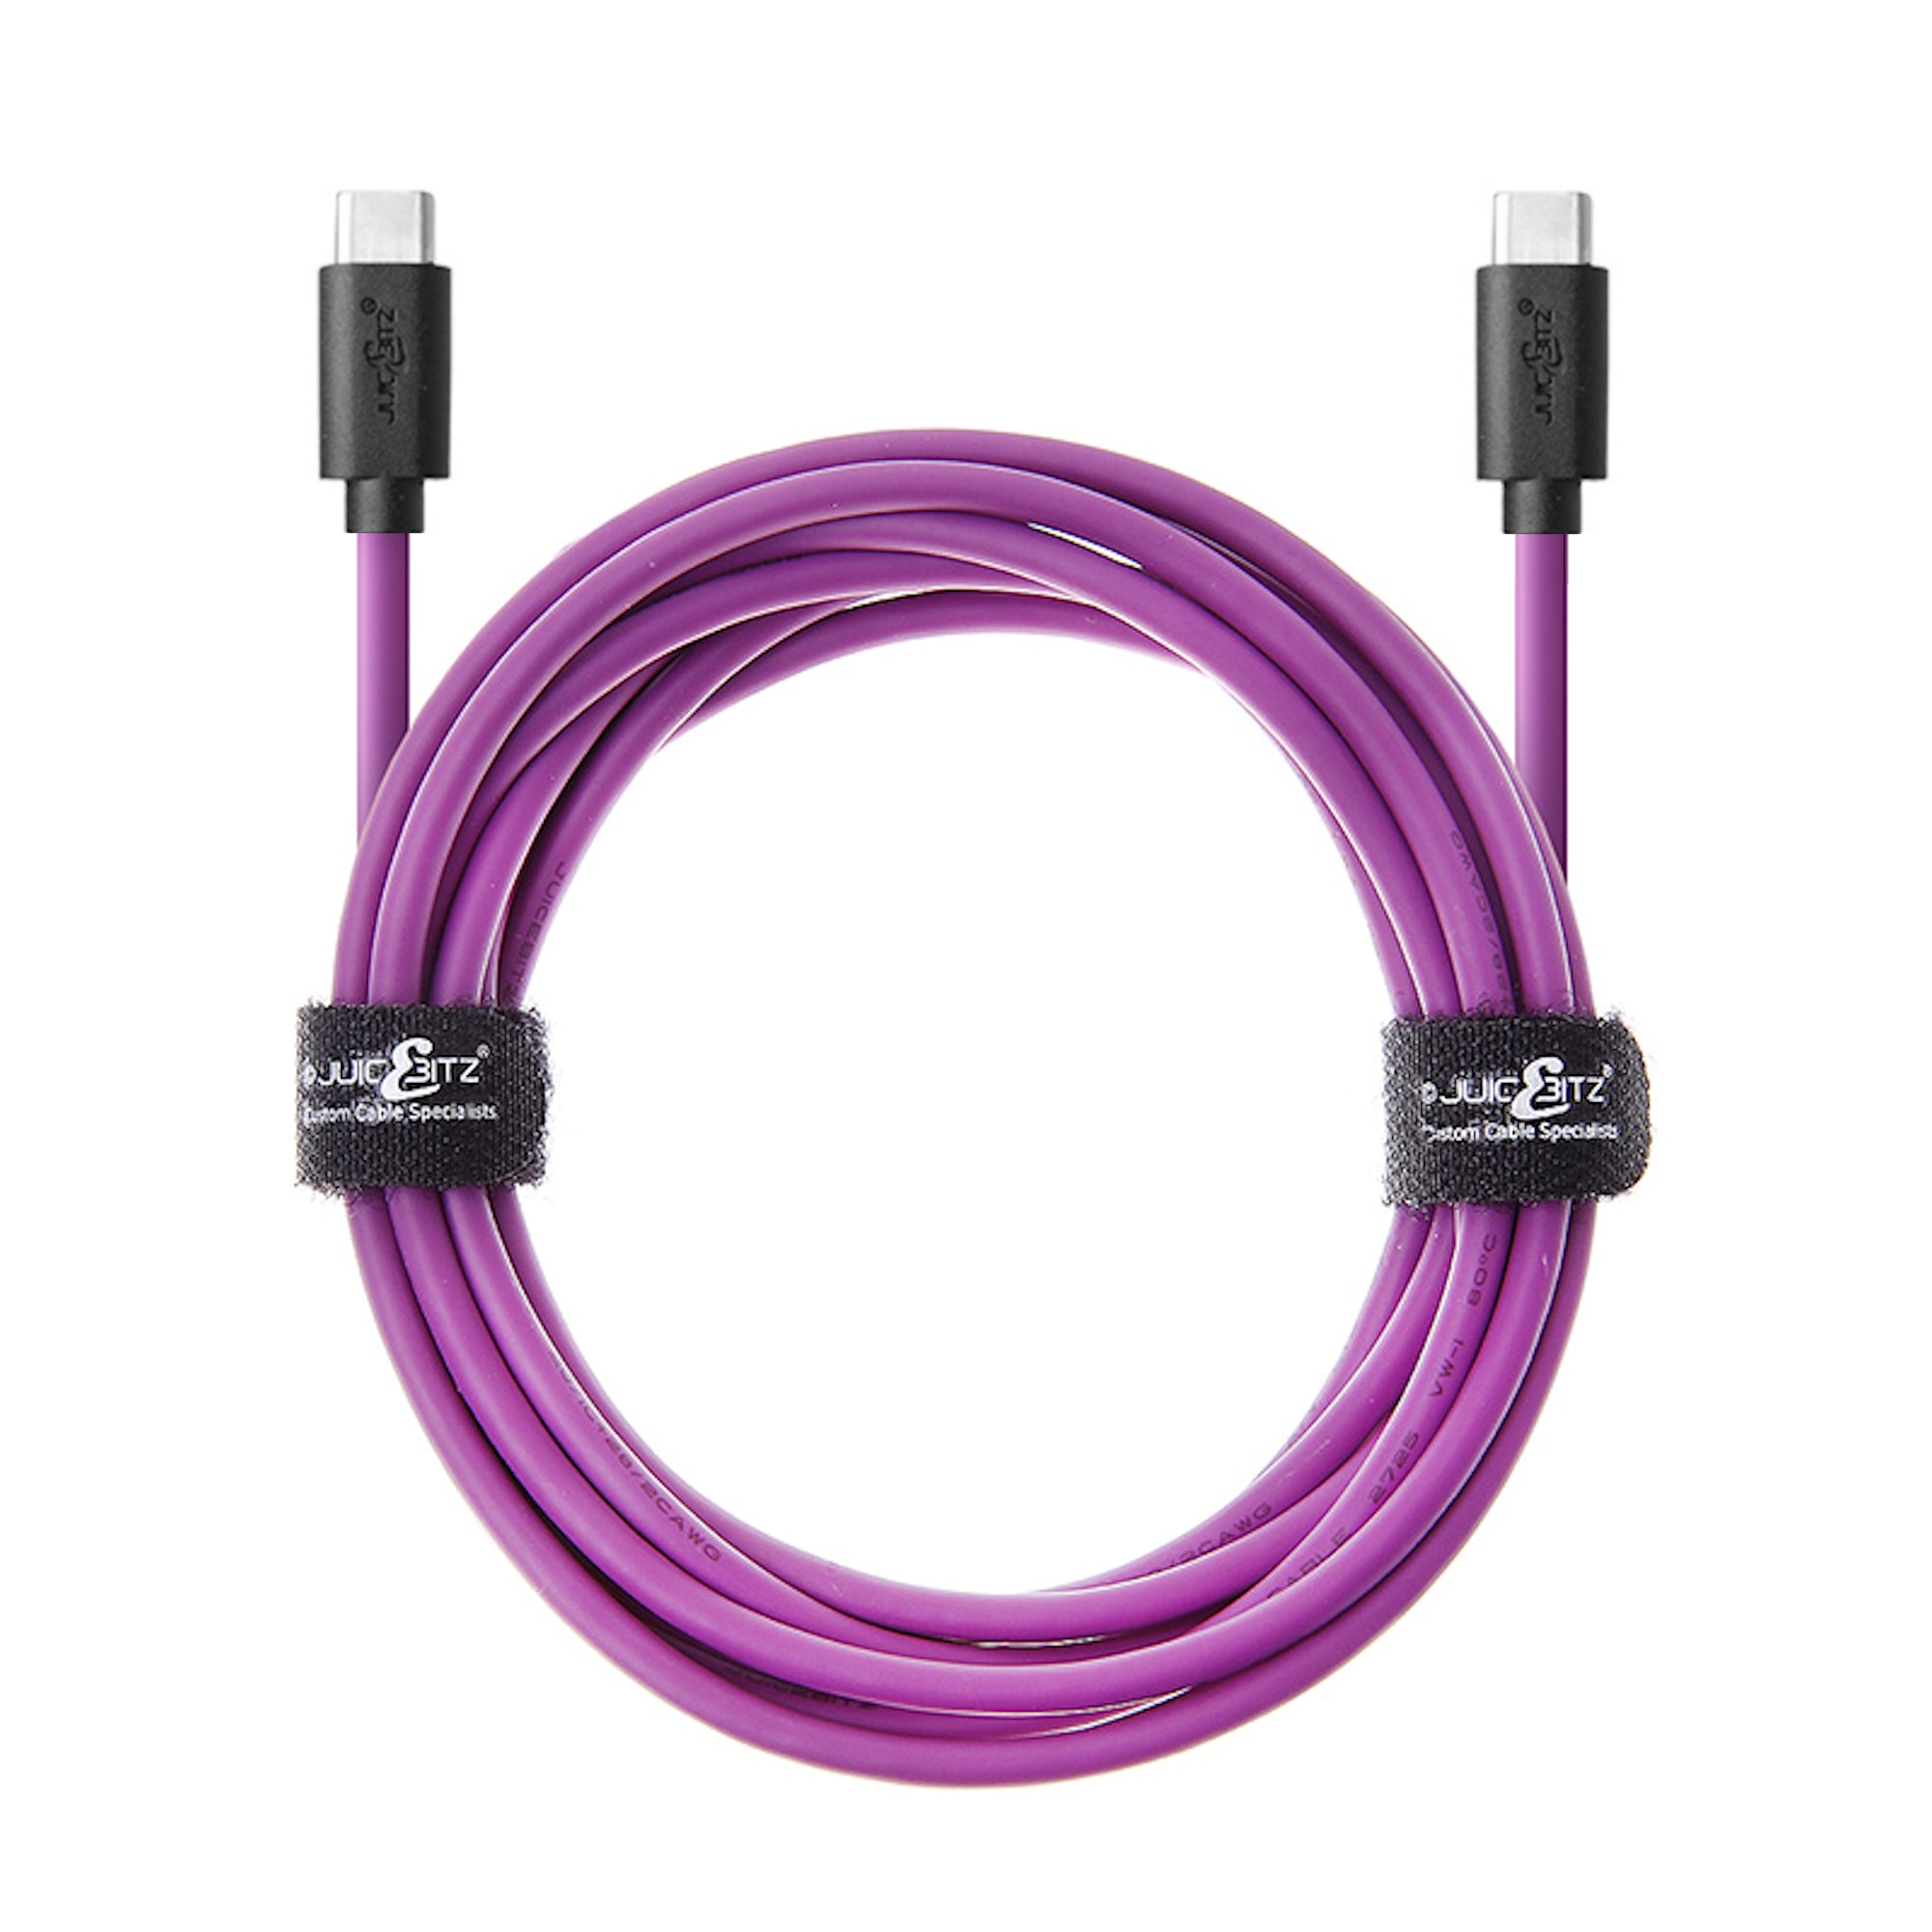 USB-C to USB-C 3A Charger Cable USB 2.0 Data Transfer Lead - Purple